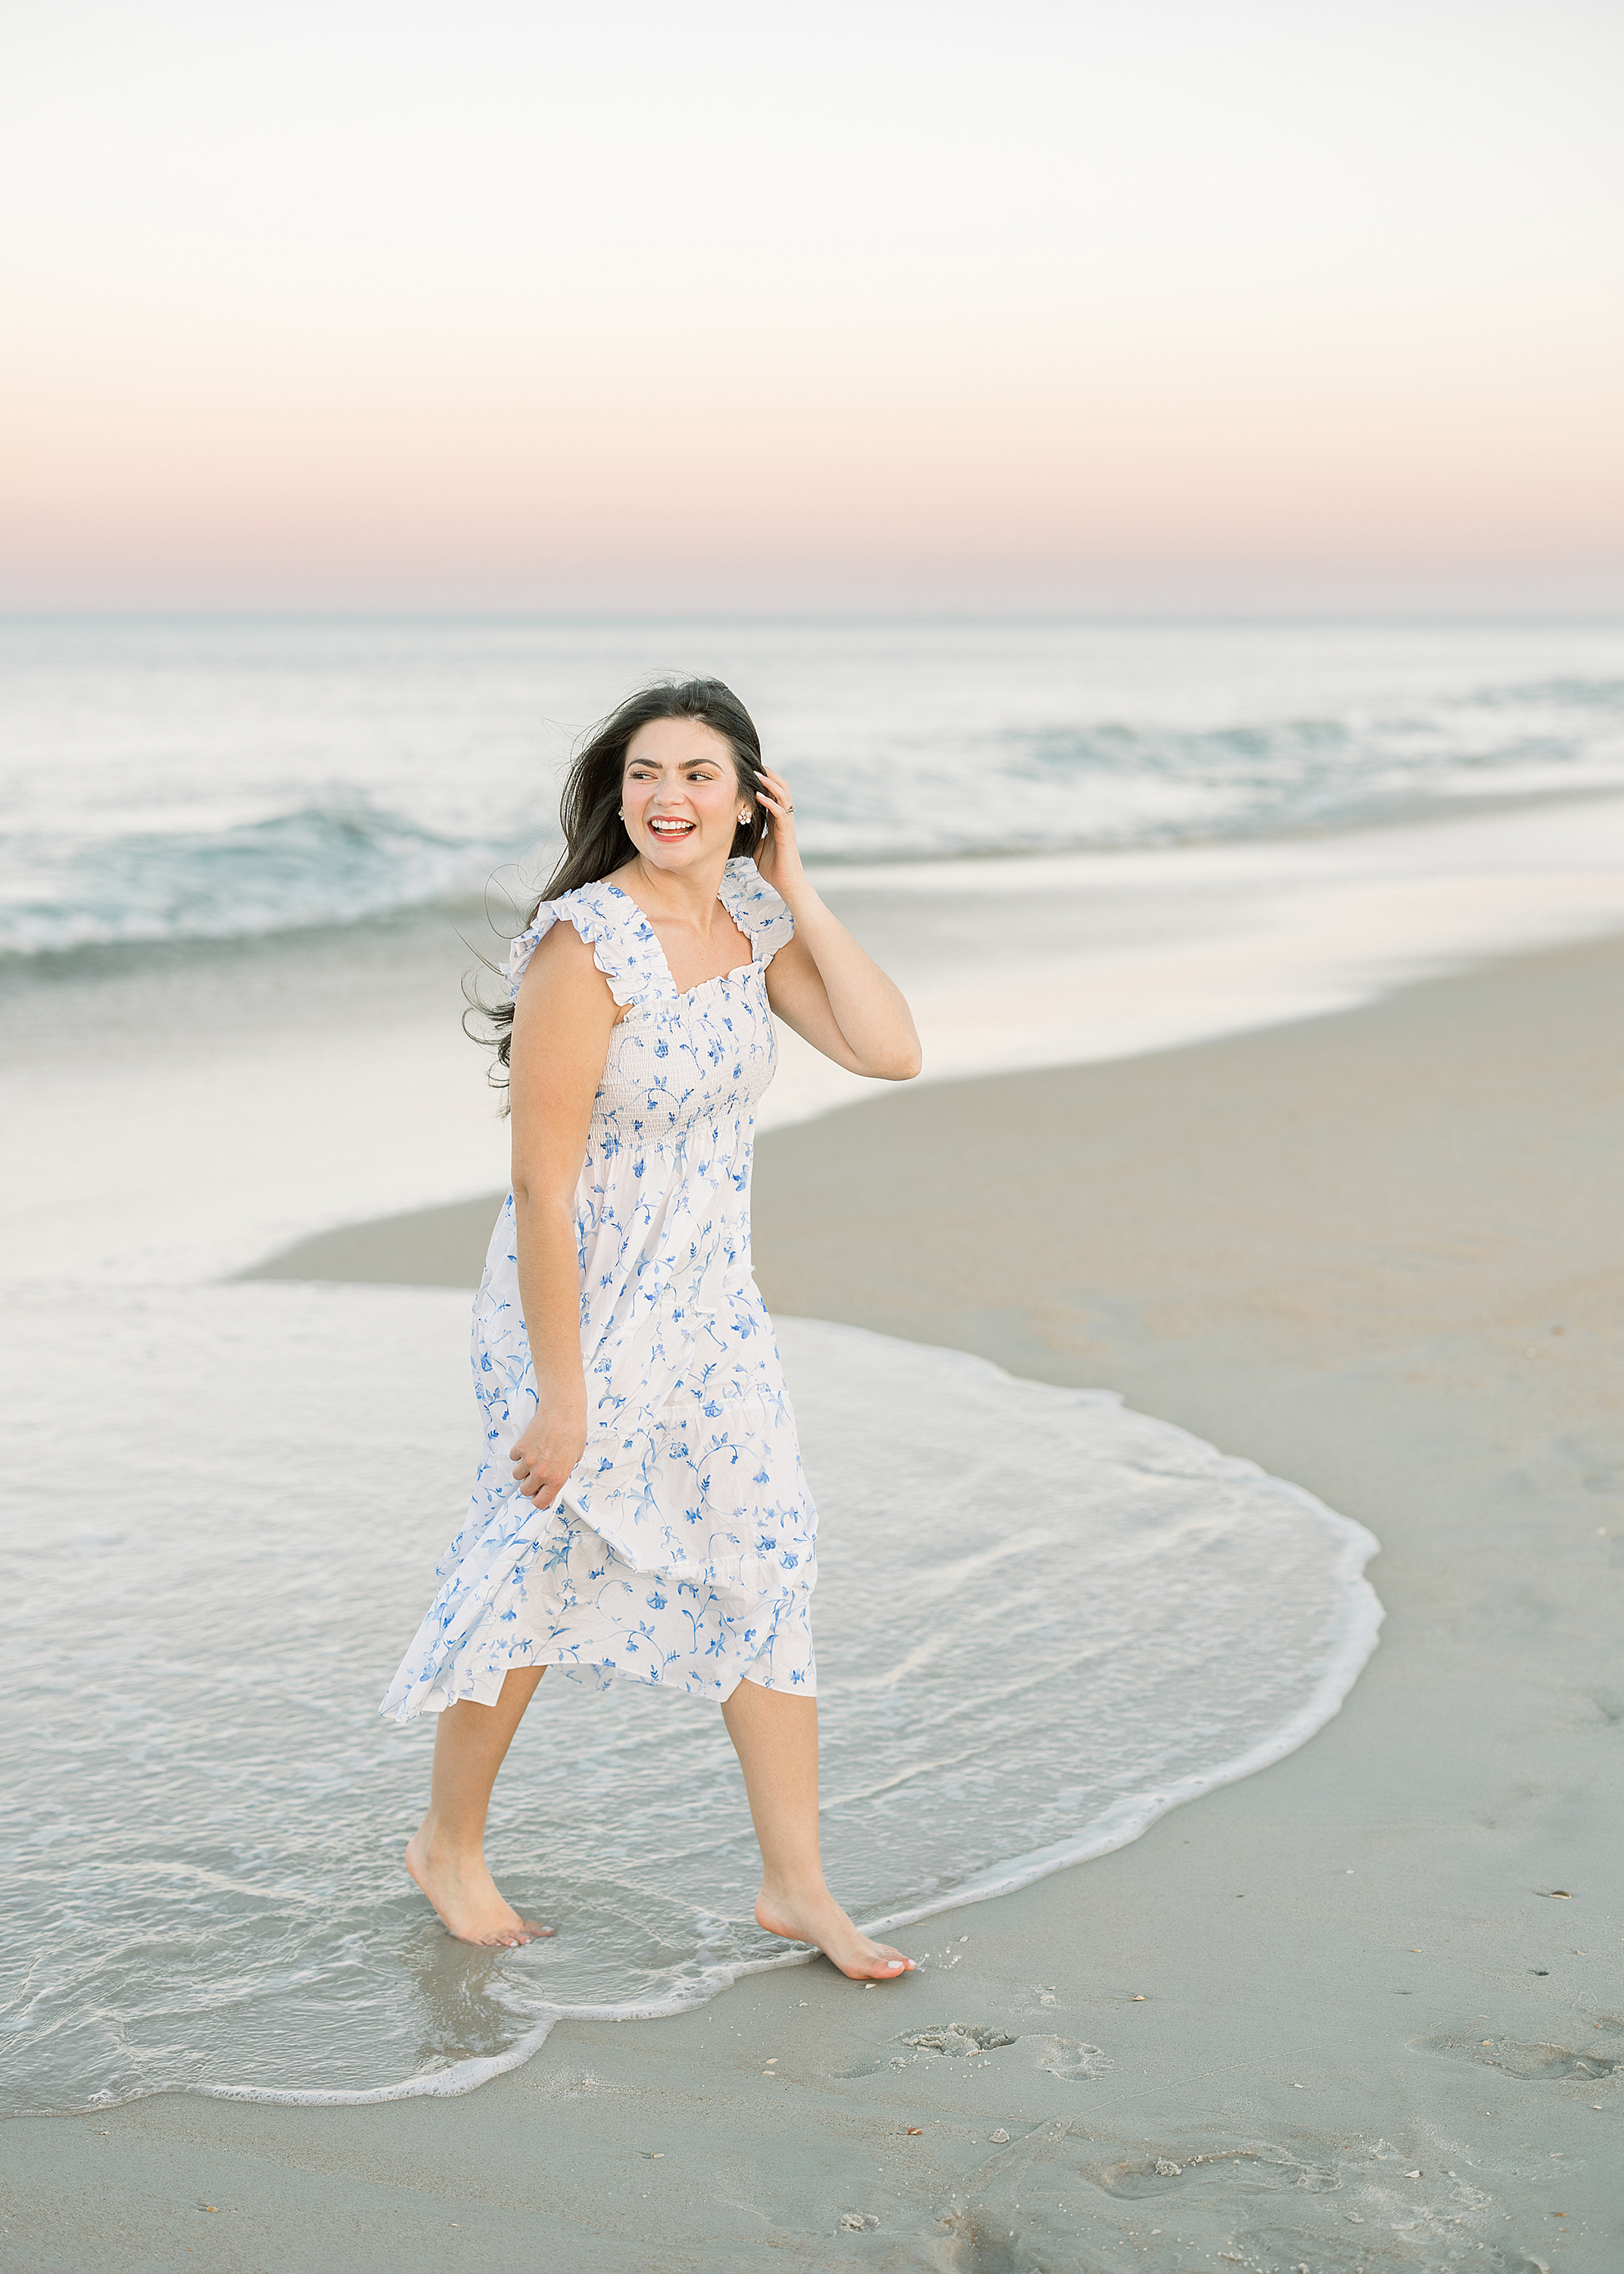 A pregnancy announcement portrait of a woman walking through the water on the beach at sunset.